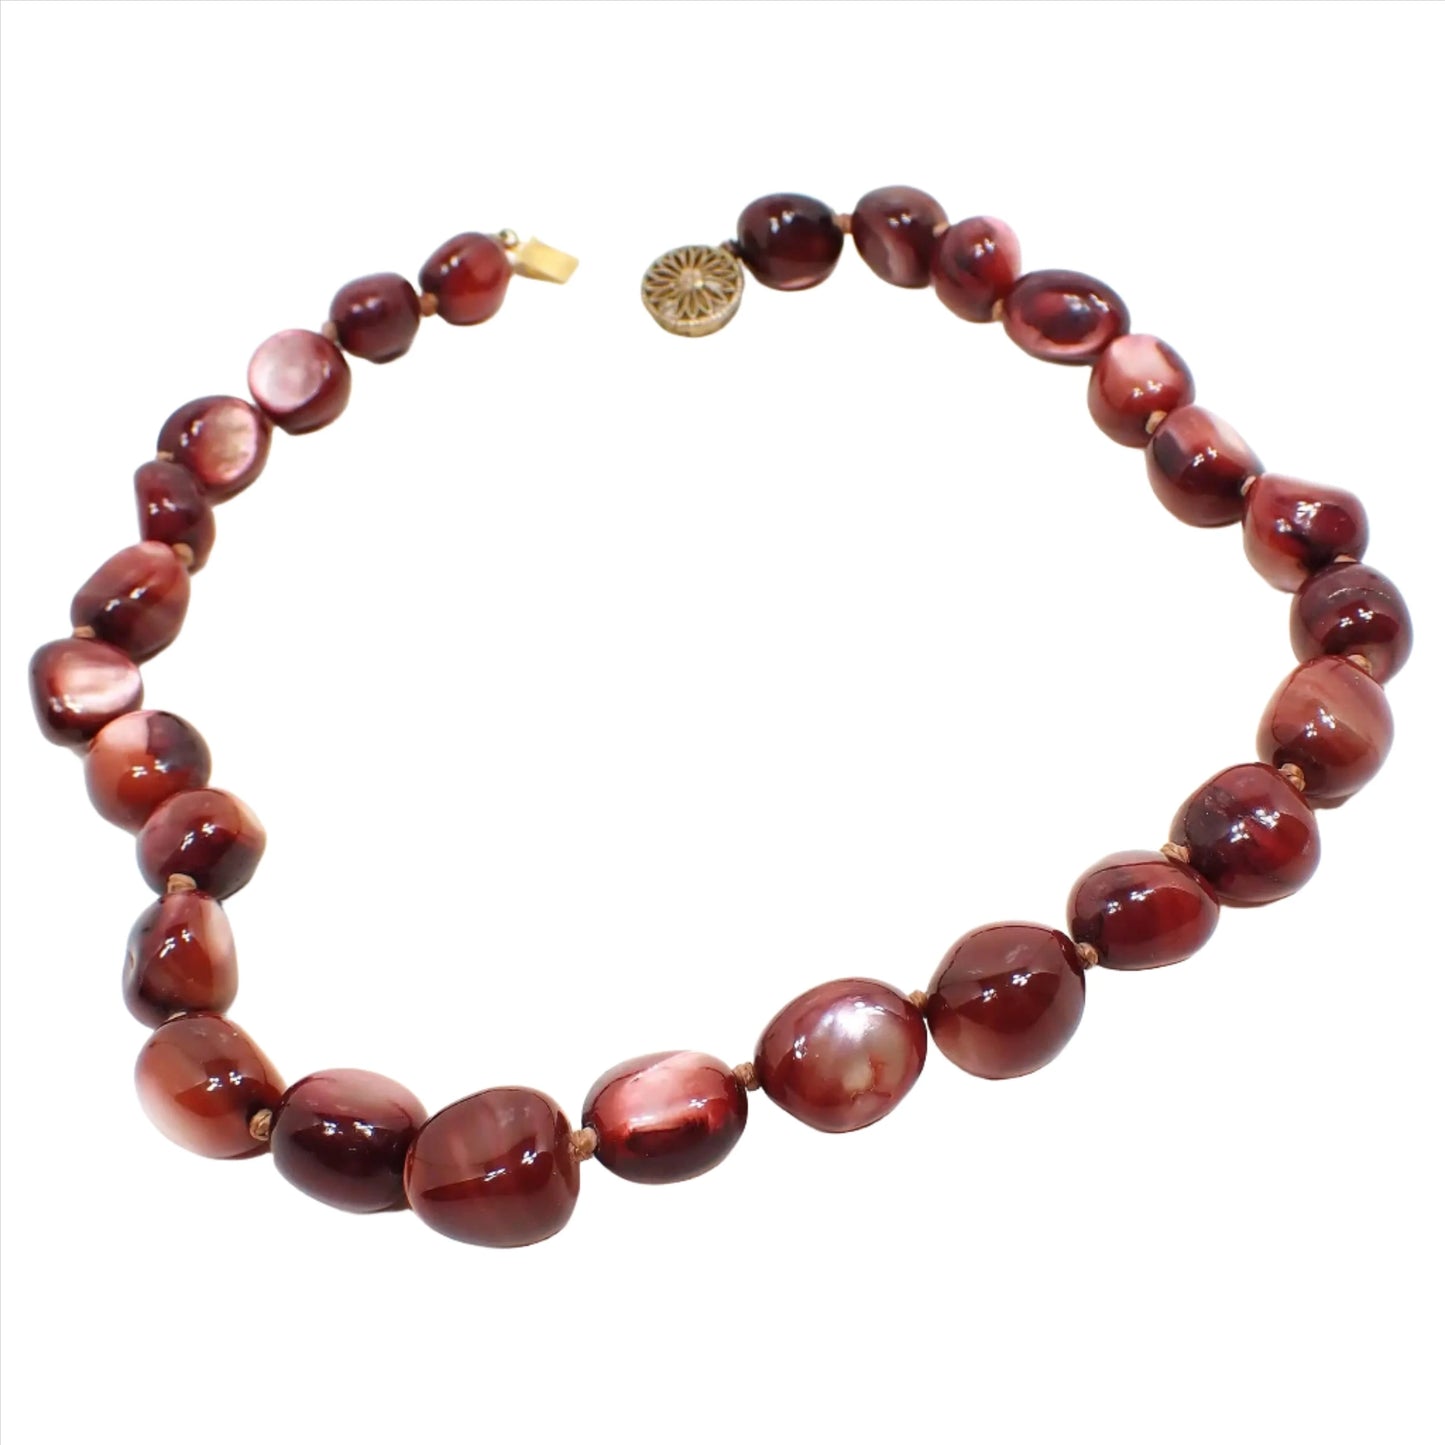 Front view of the Mid Century vintage shell beaded necklace. It is beaded with chunky nugget style dyed mother of pearl beads that have red and brown tones. The beads are hand knotted in between each one. There is a filigree vermeil gold over sterling box clasp at the end.